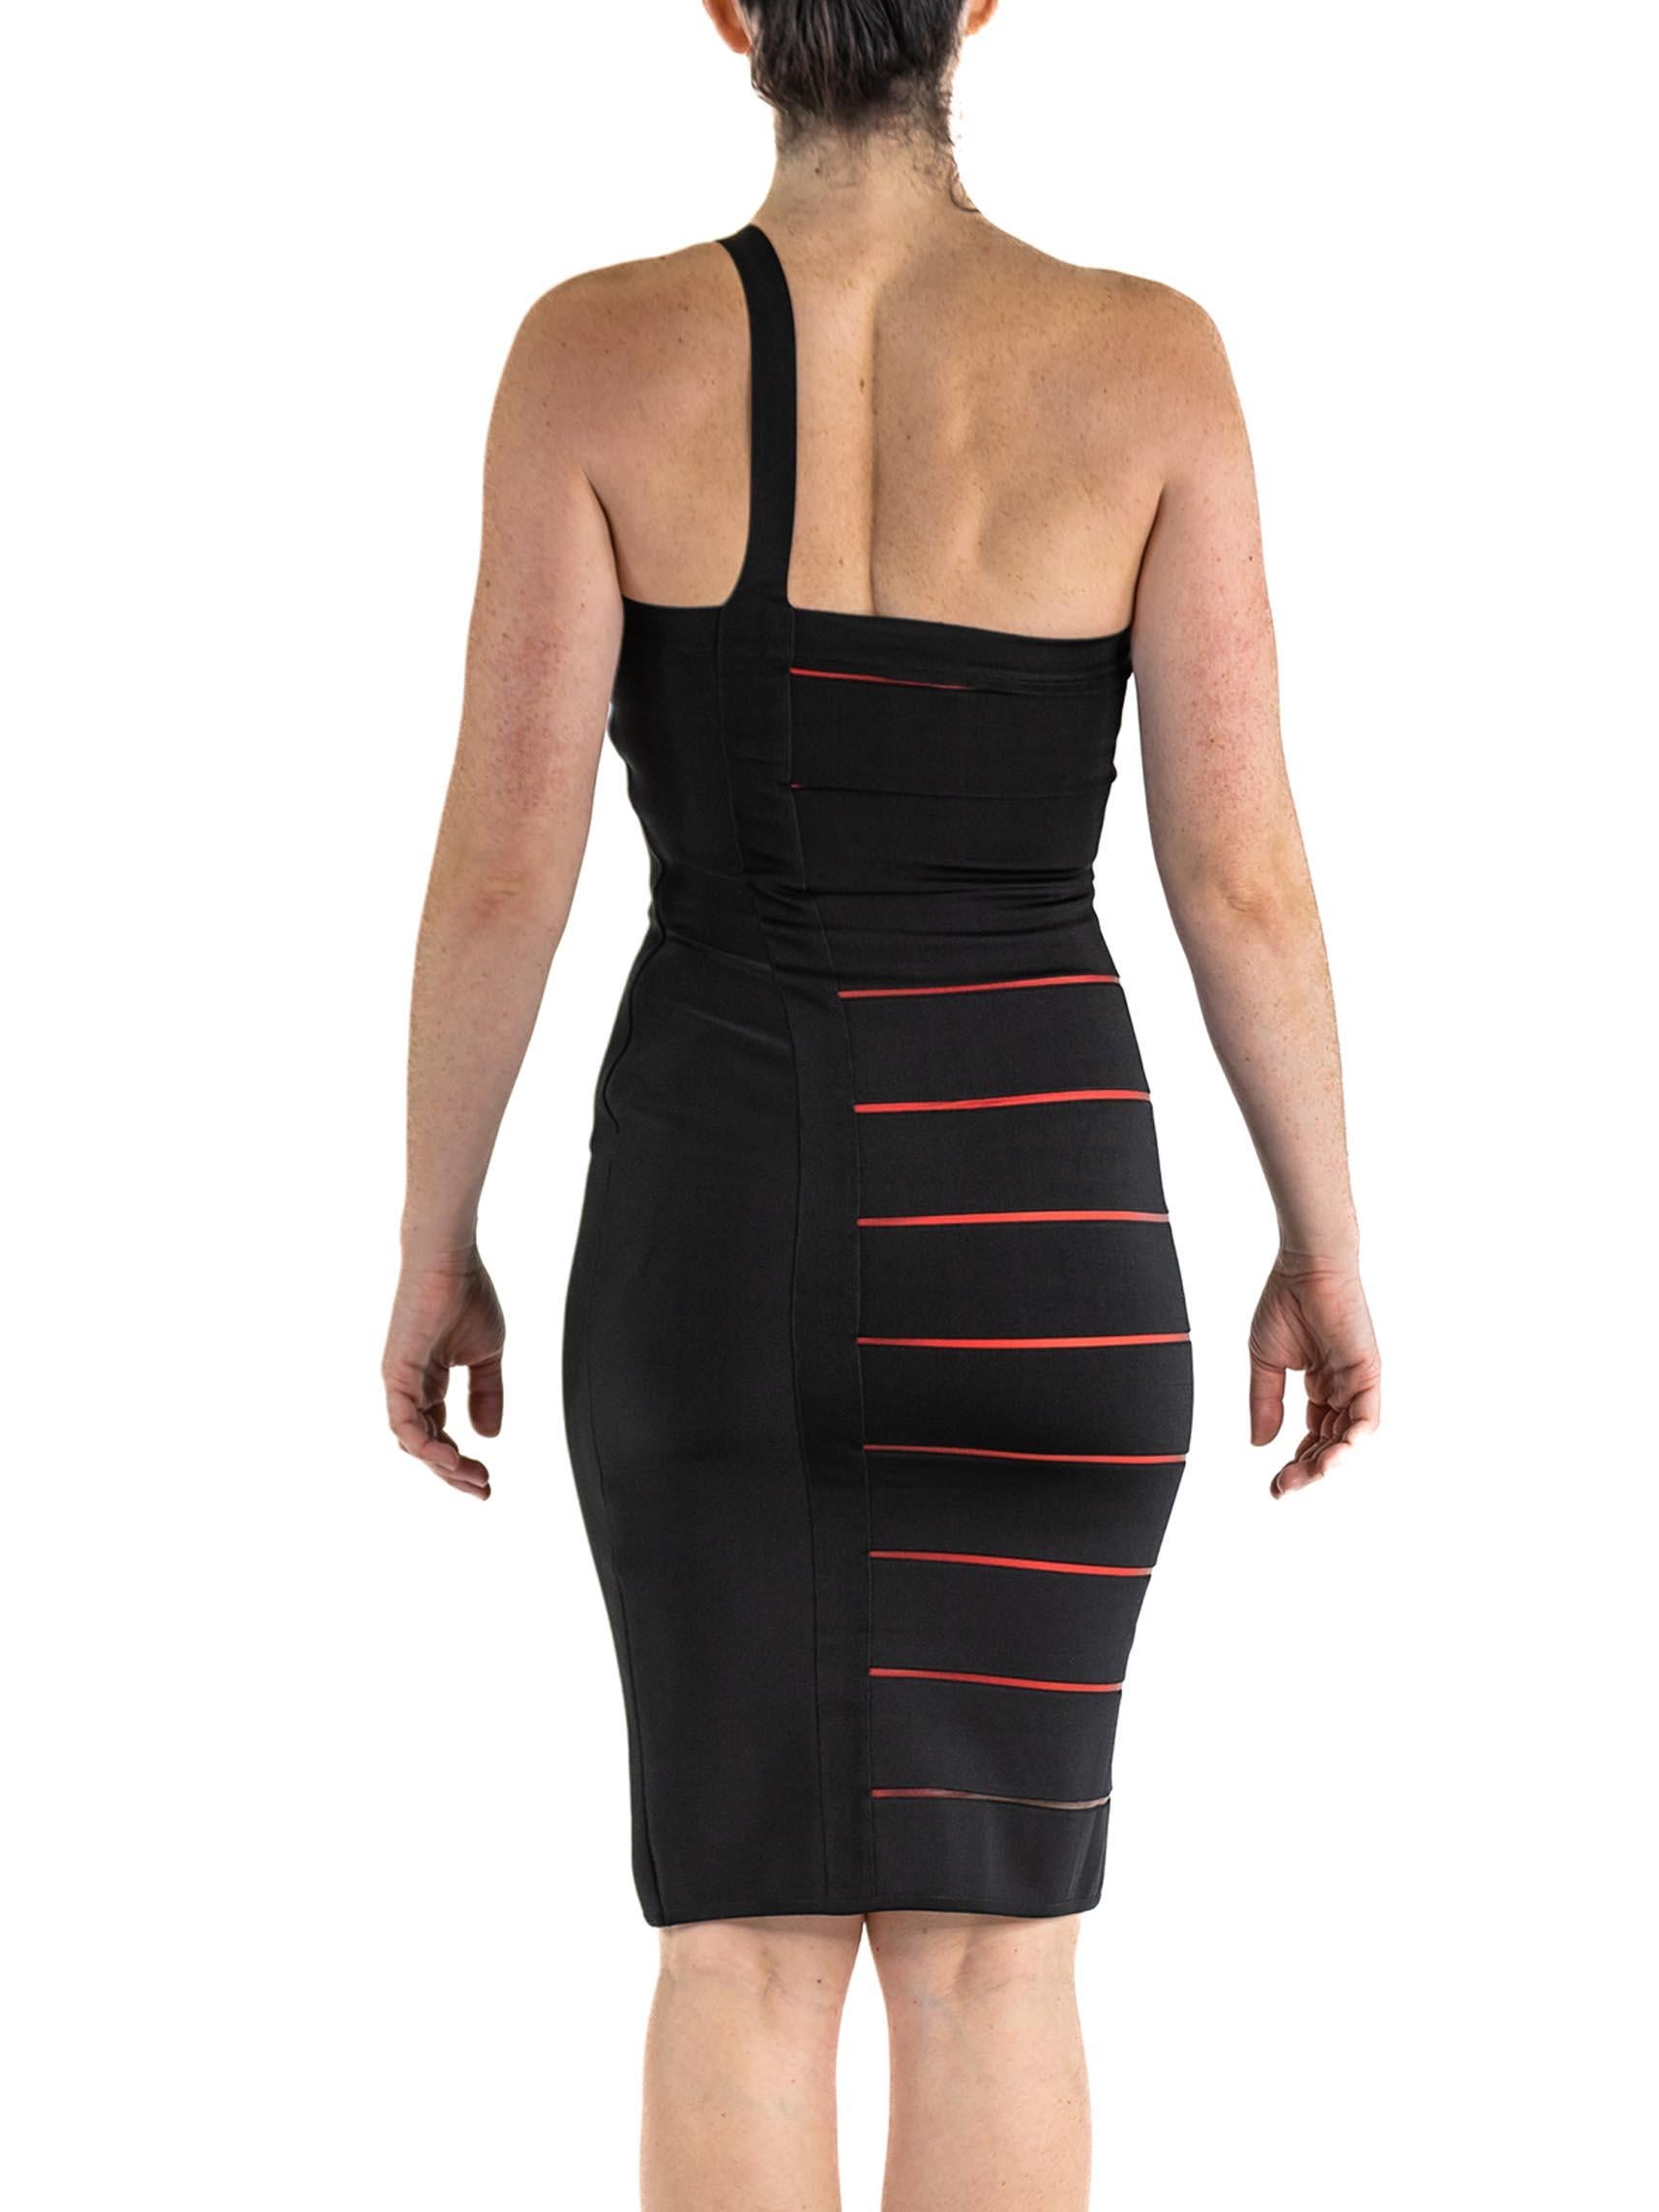 1990S HERVE LEGER Black & Red Rayon Blend Body-Con Cocktail Dress For Sale 4